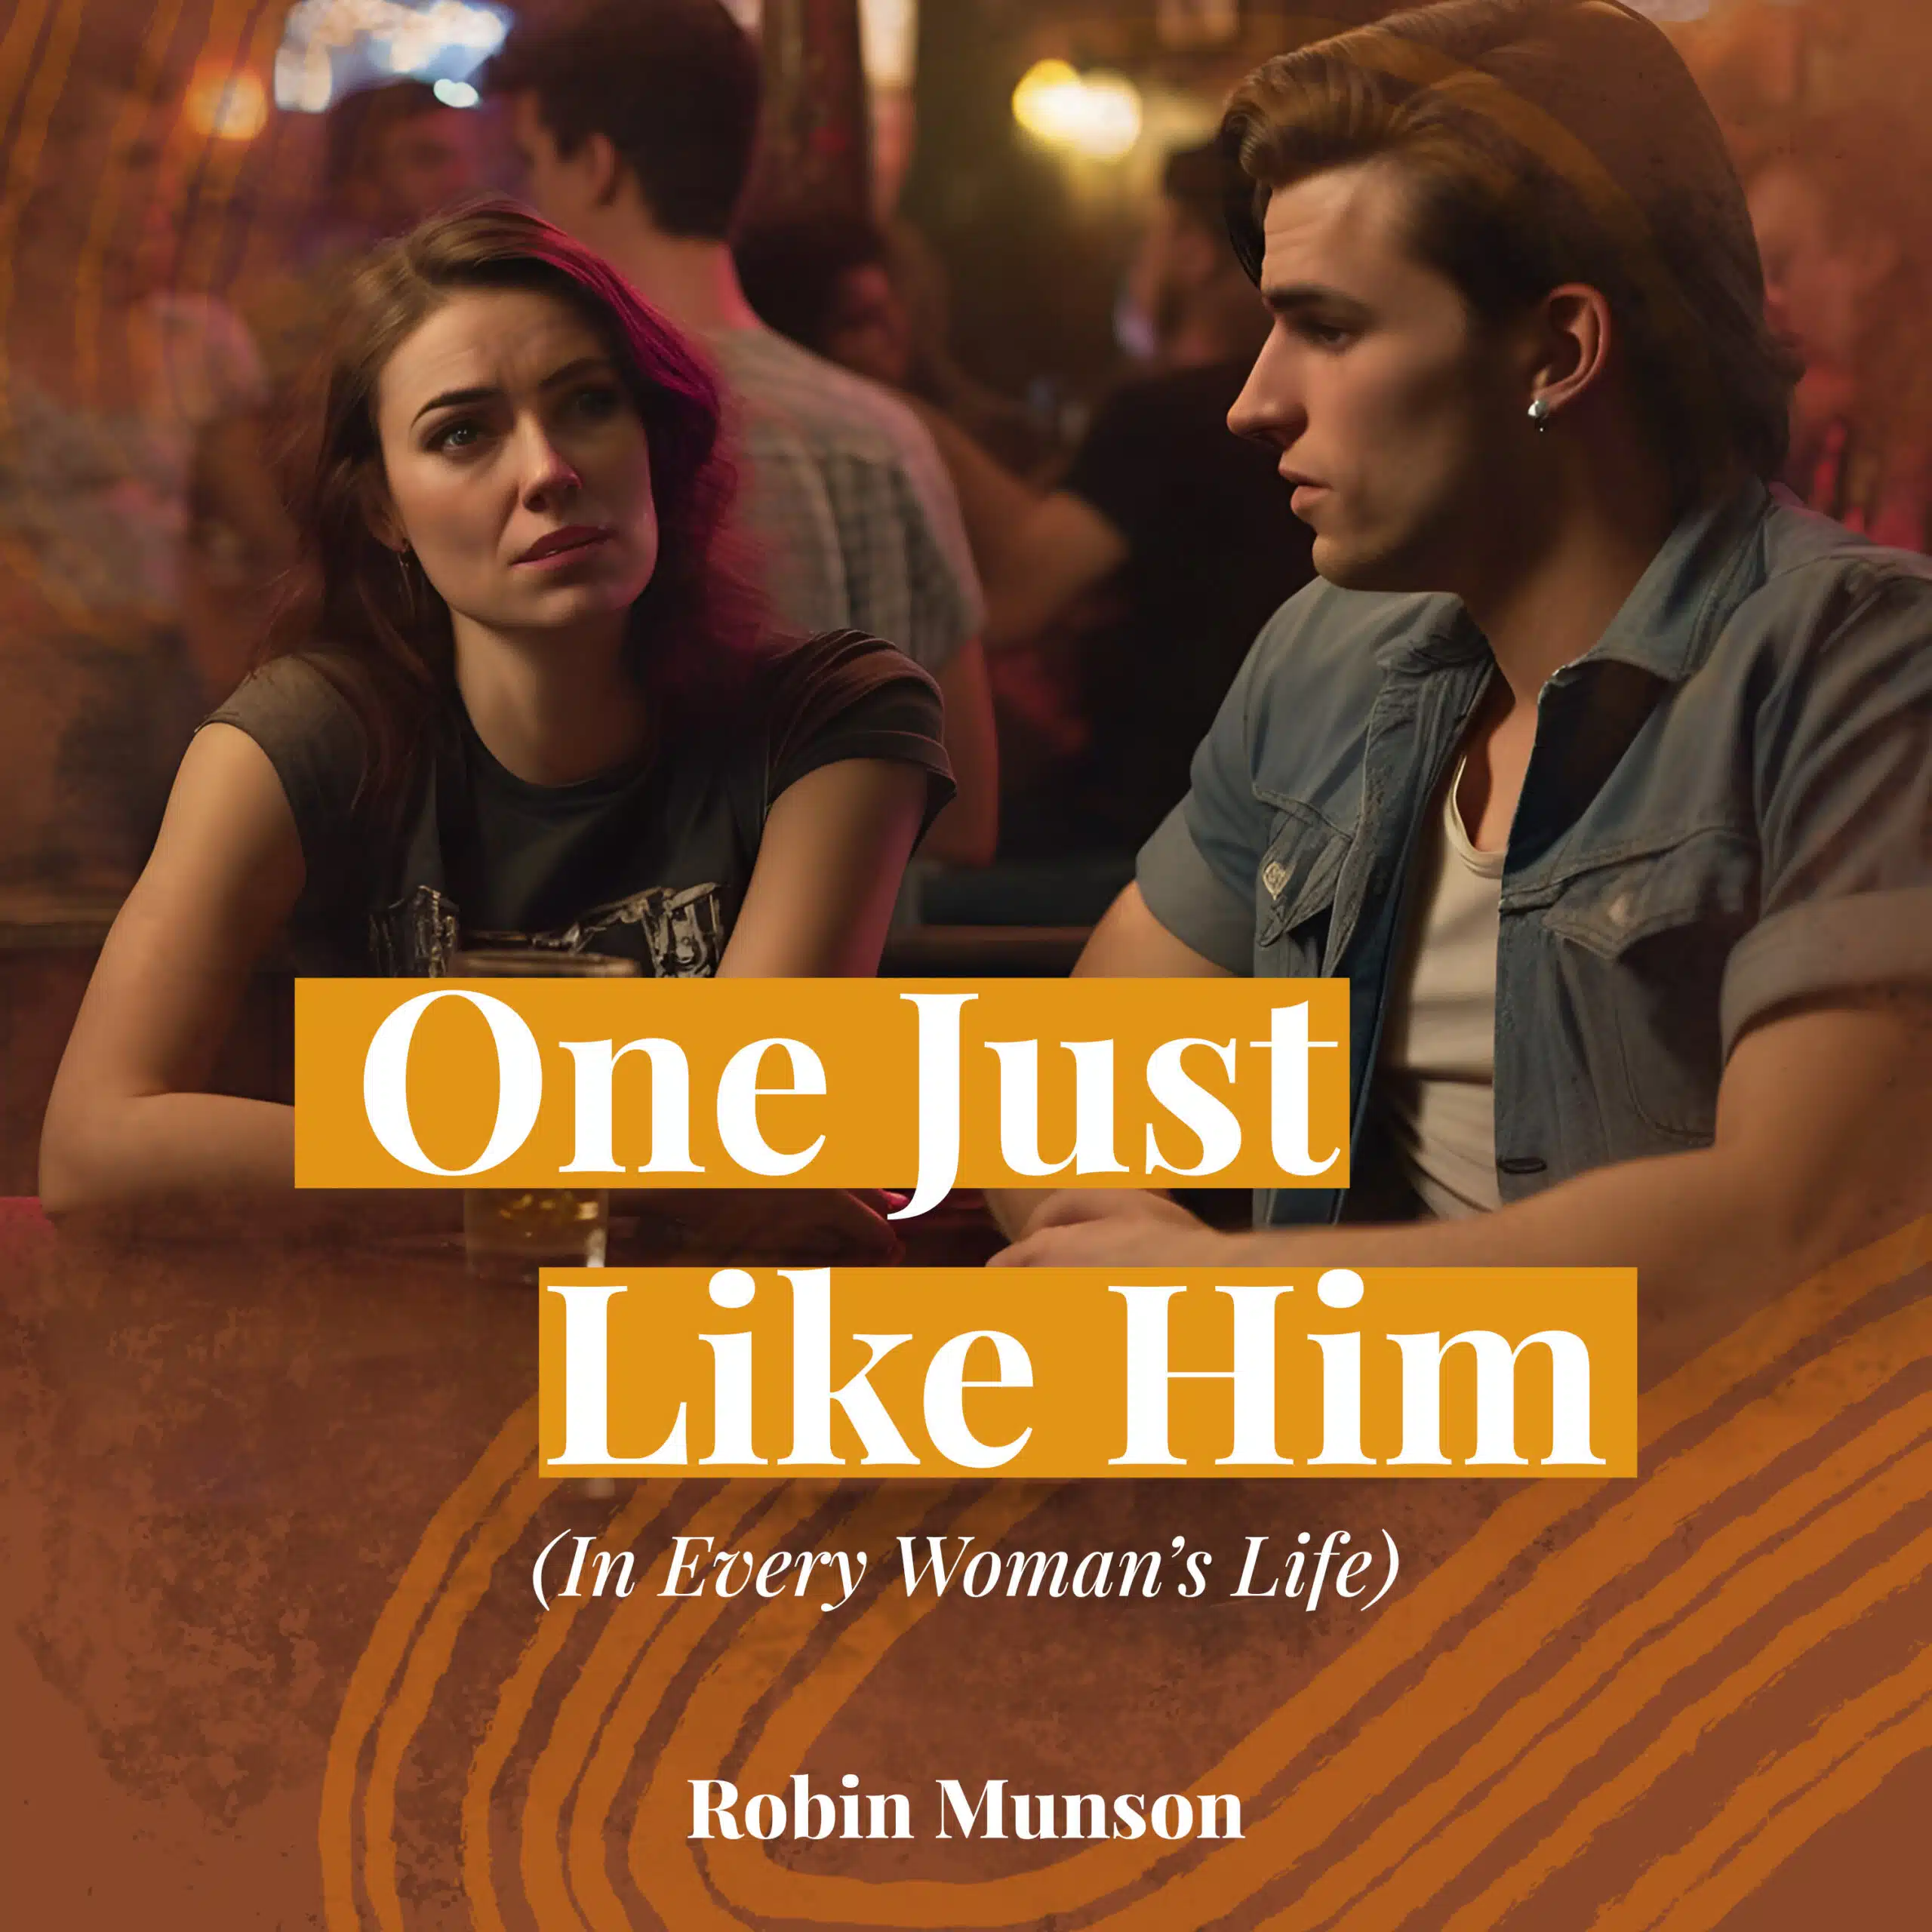 One Just Like Him (In Every Woman's Life)